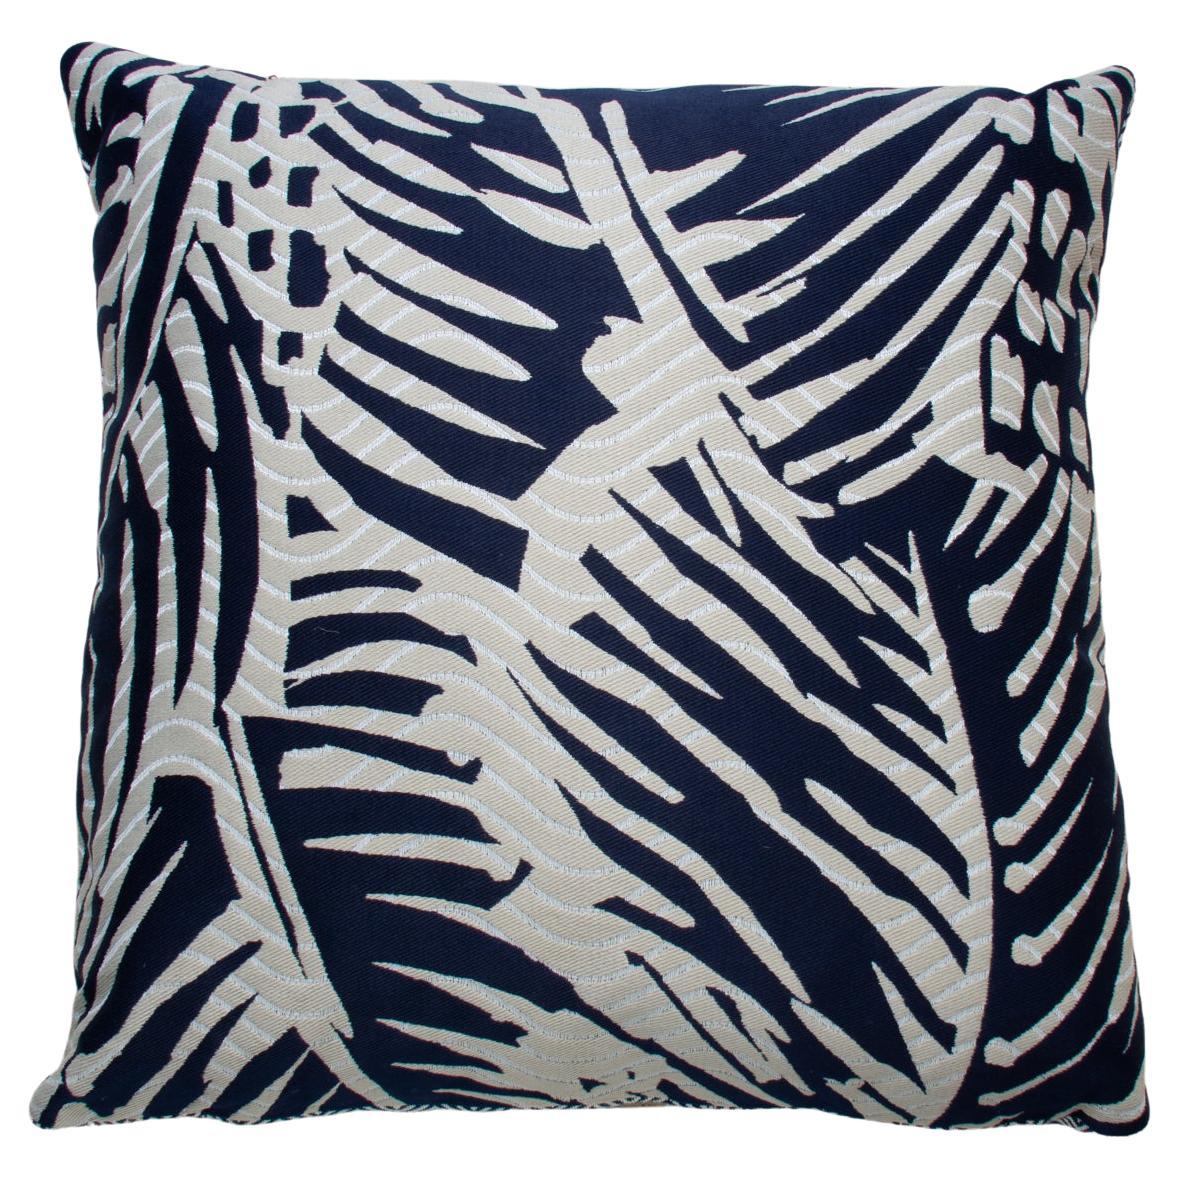 Hermes Pillow Feuillage Vague in Navy, Striped Backing